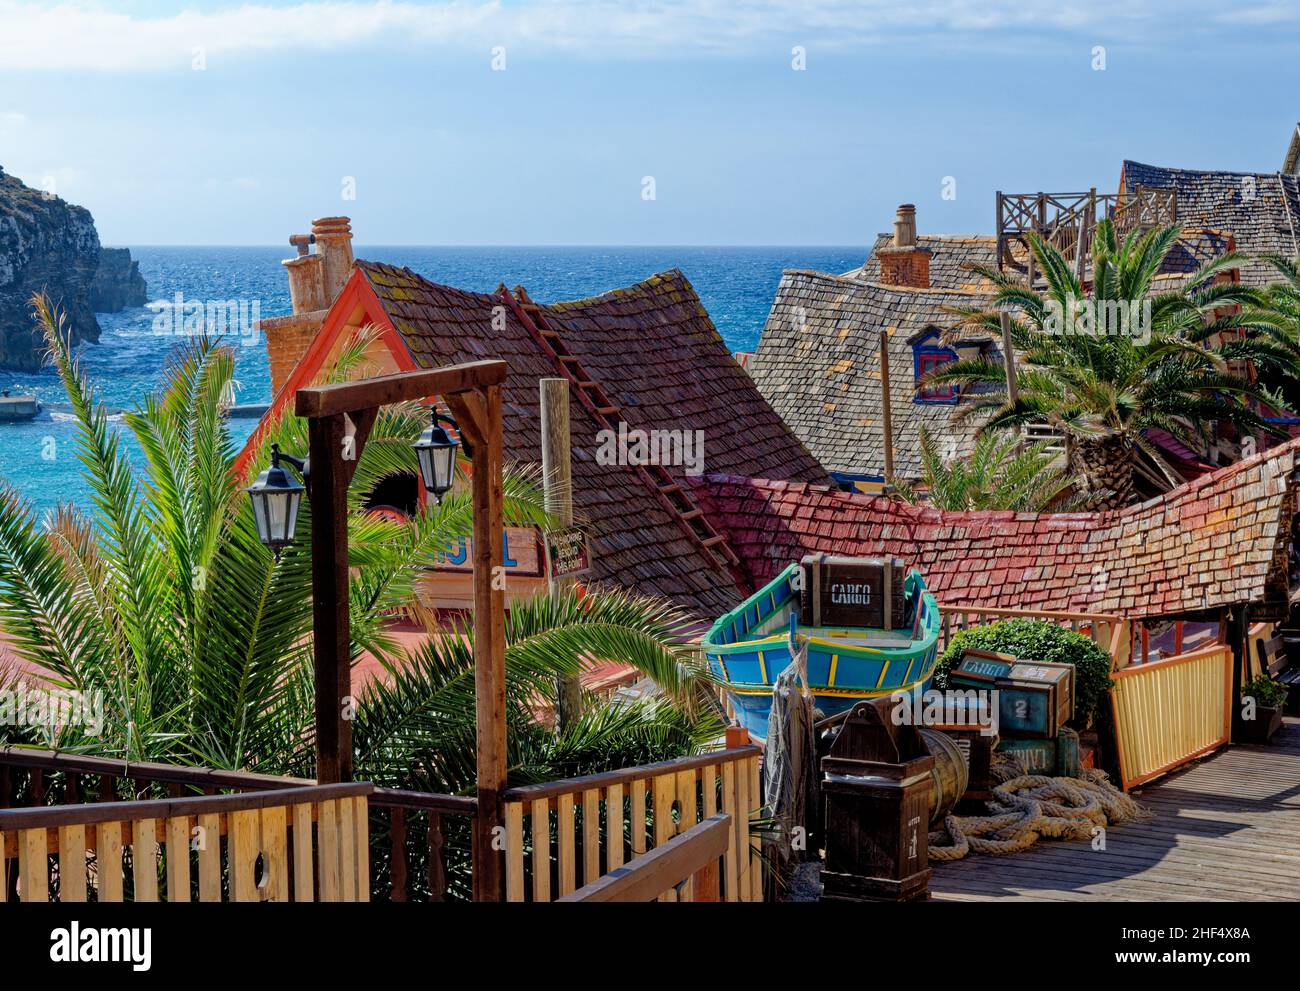 Malta - Popeye Village in Anchor Bay - Sweethaven Village. 1st of February 2016 Stock Photo